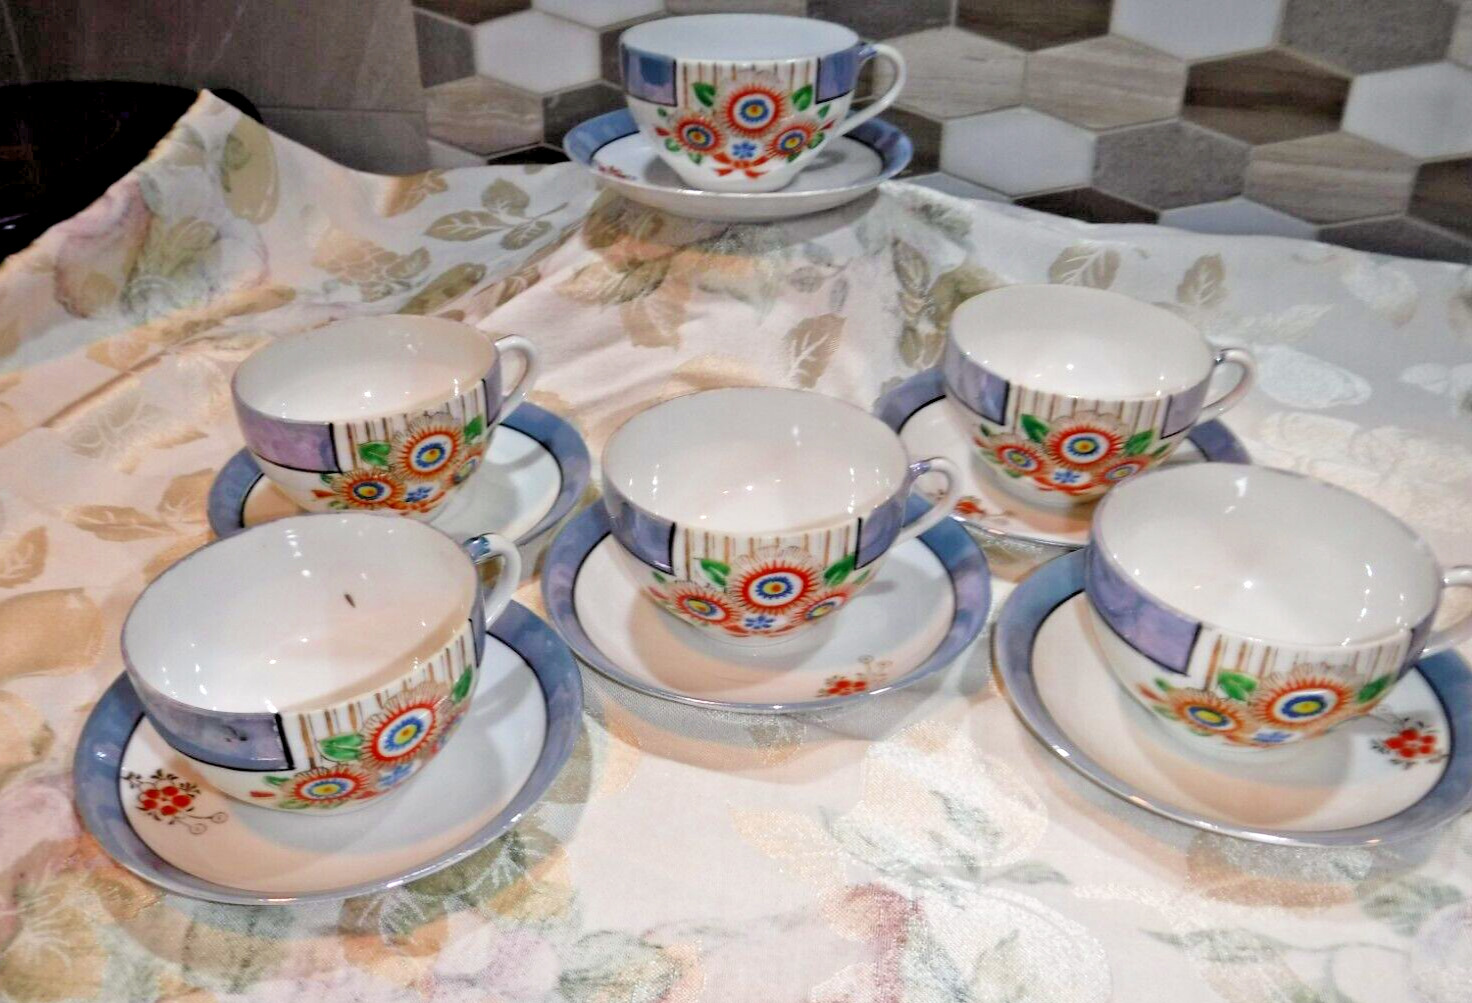 VTG Japanese Tea cups & Saucers (6) Hand Painted